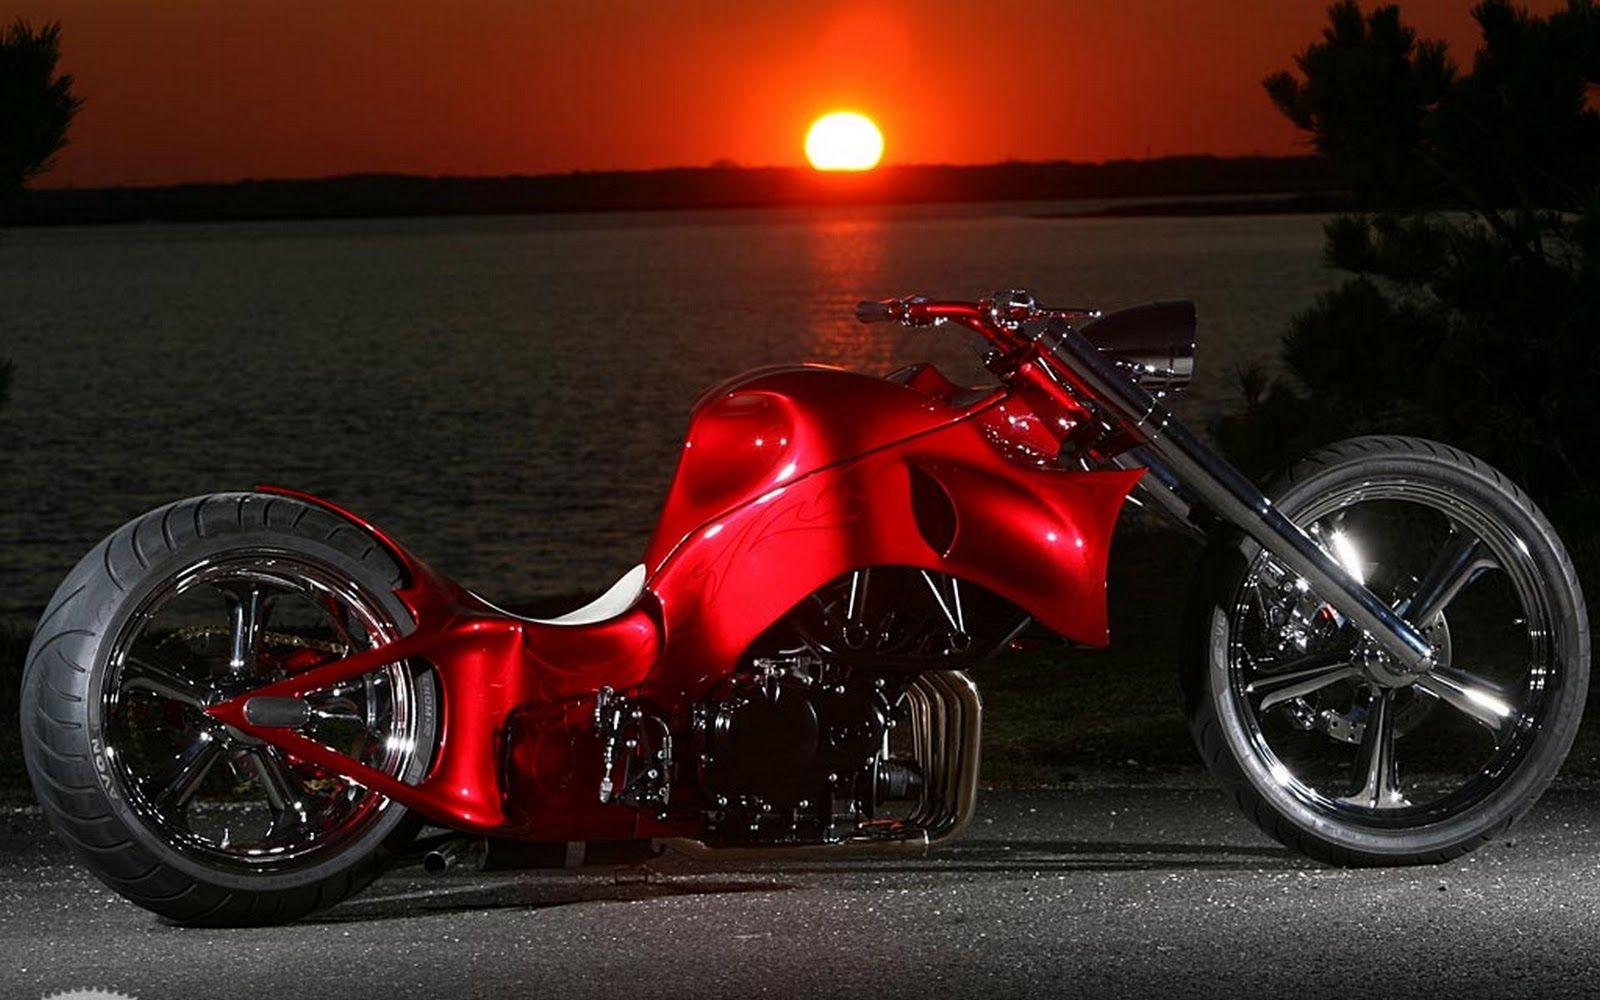 ghost rider motorcycle